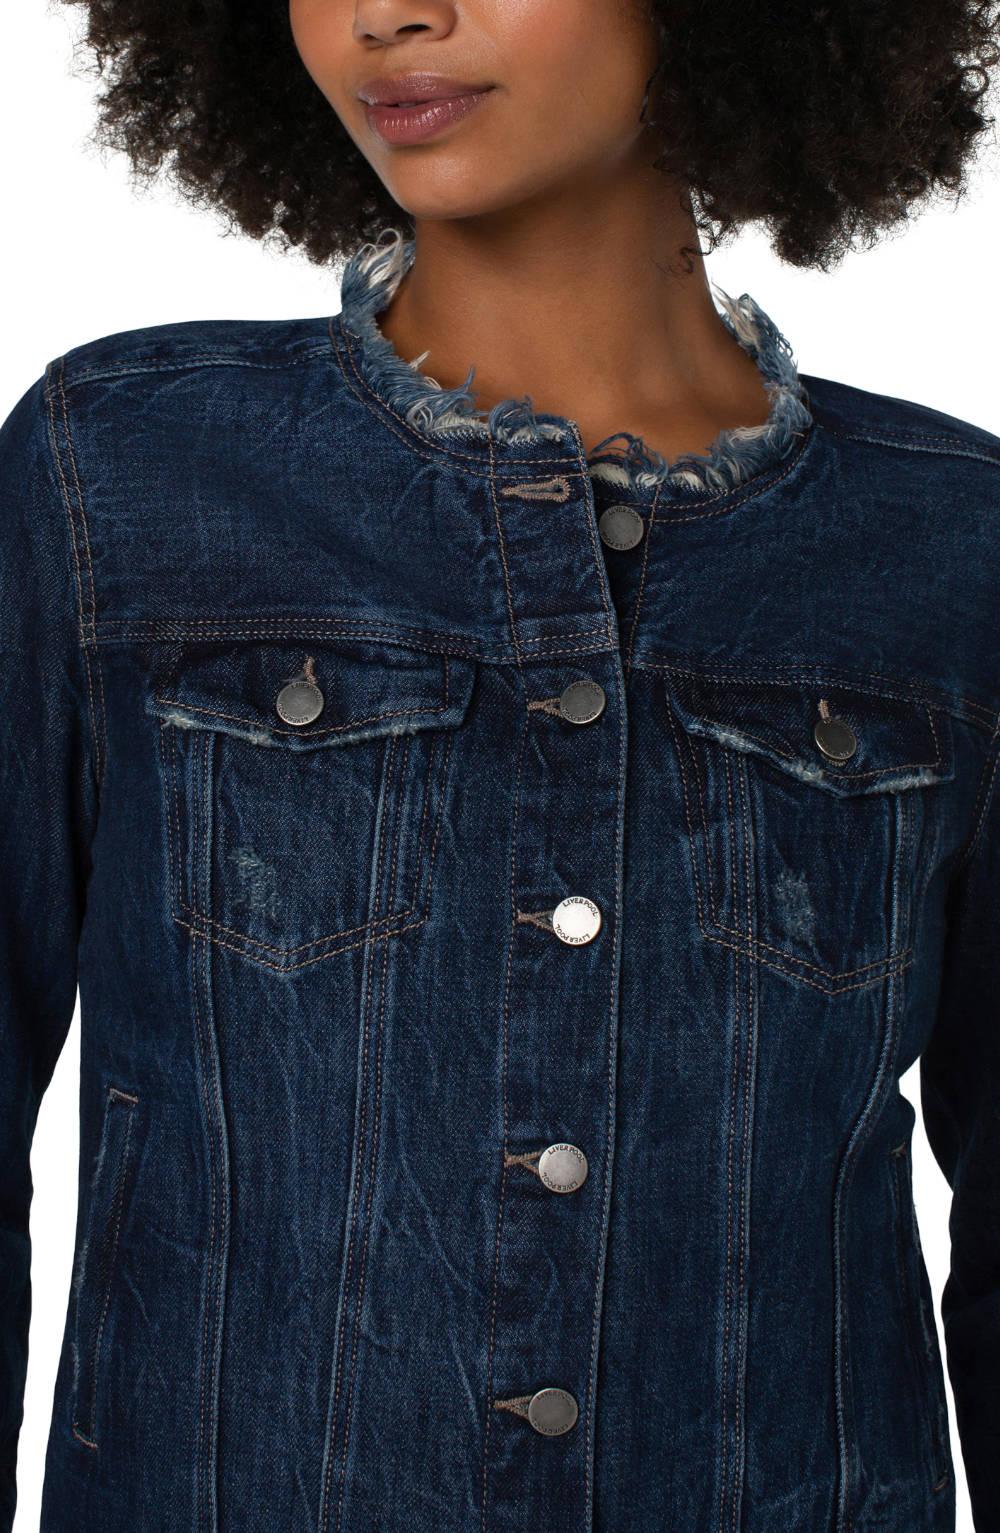 Liverpool Lace Up Denim Jacket - Strawberry Moon Boutique